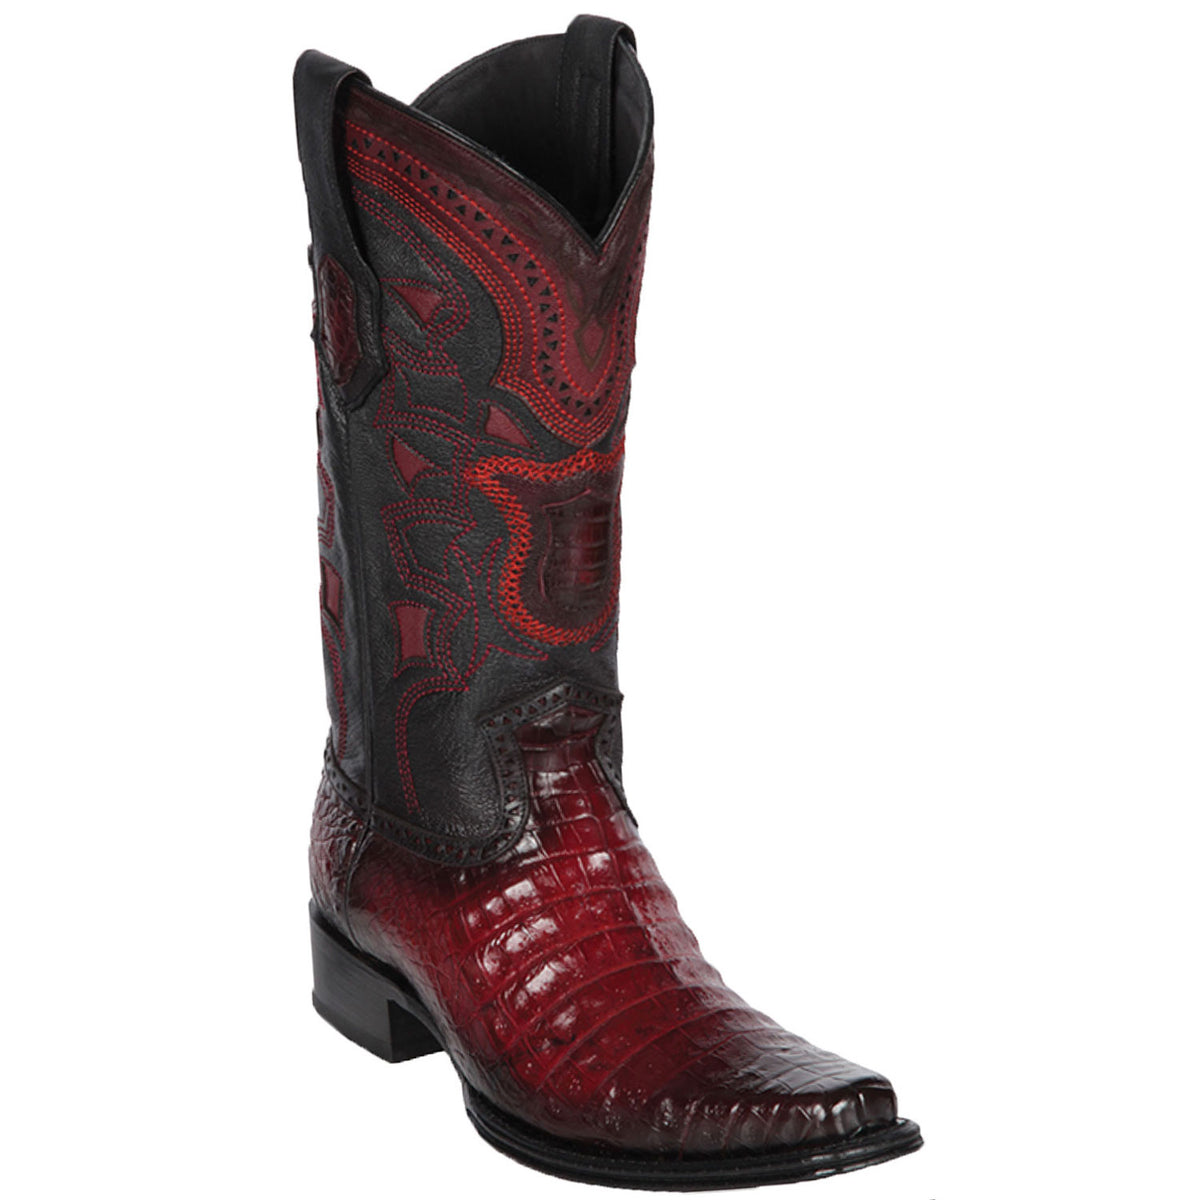 Caiman Belly Skin Boot LAB-7682